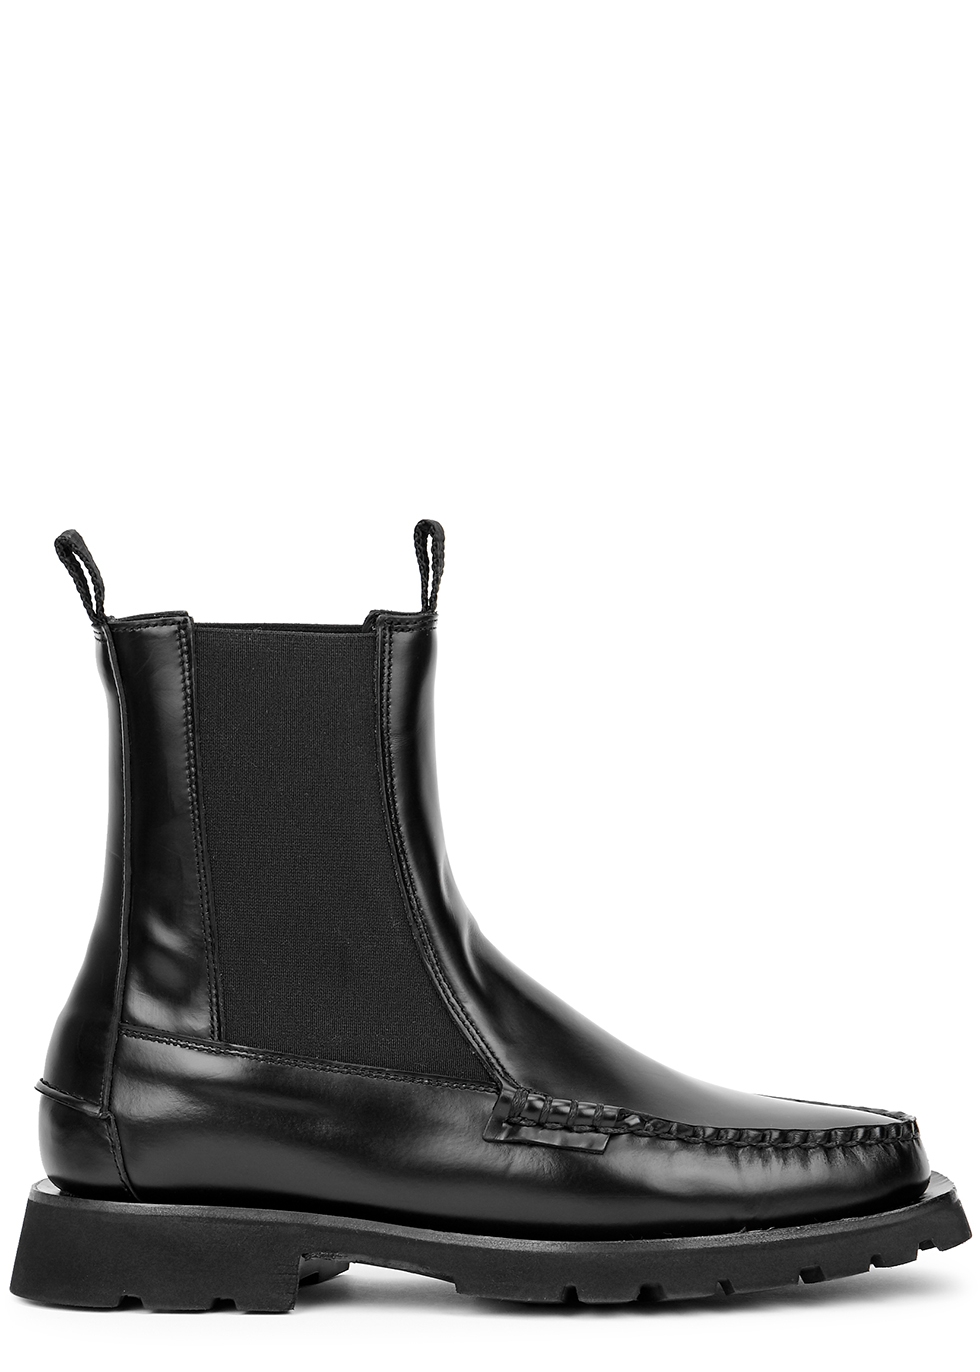 Alda black leather ankle boots